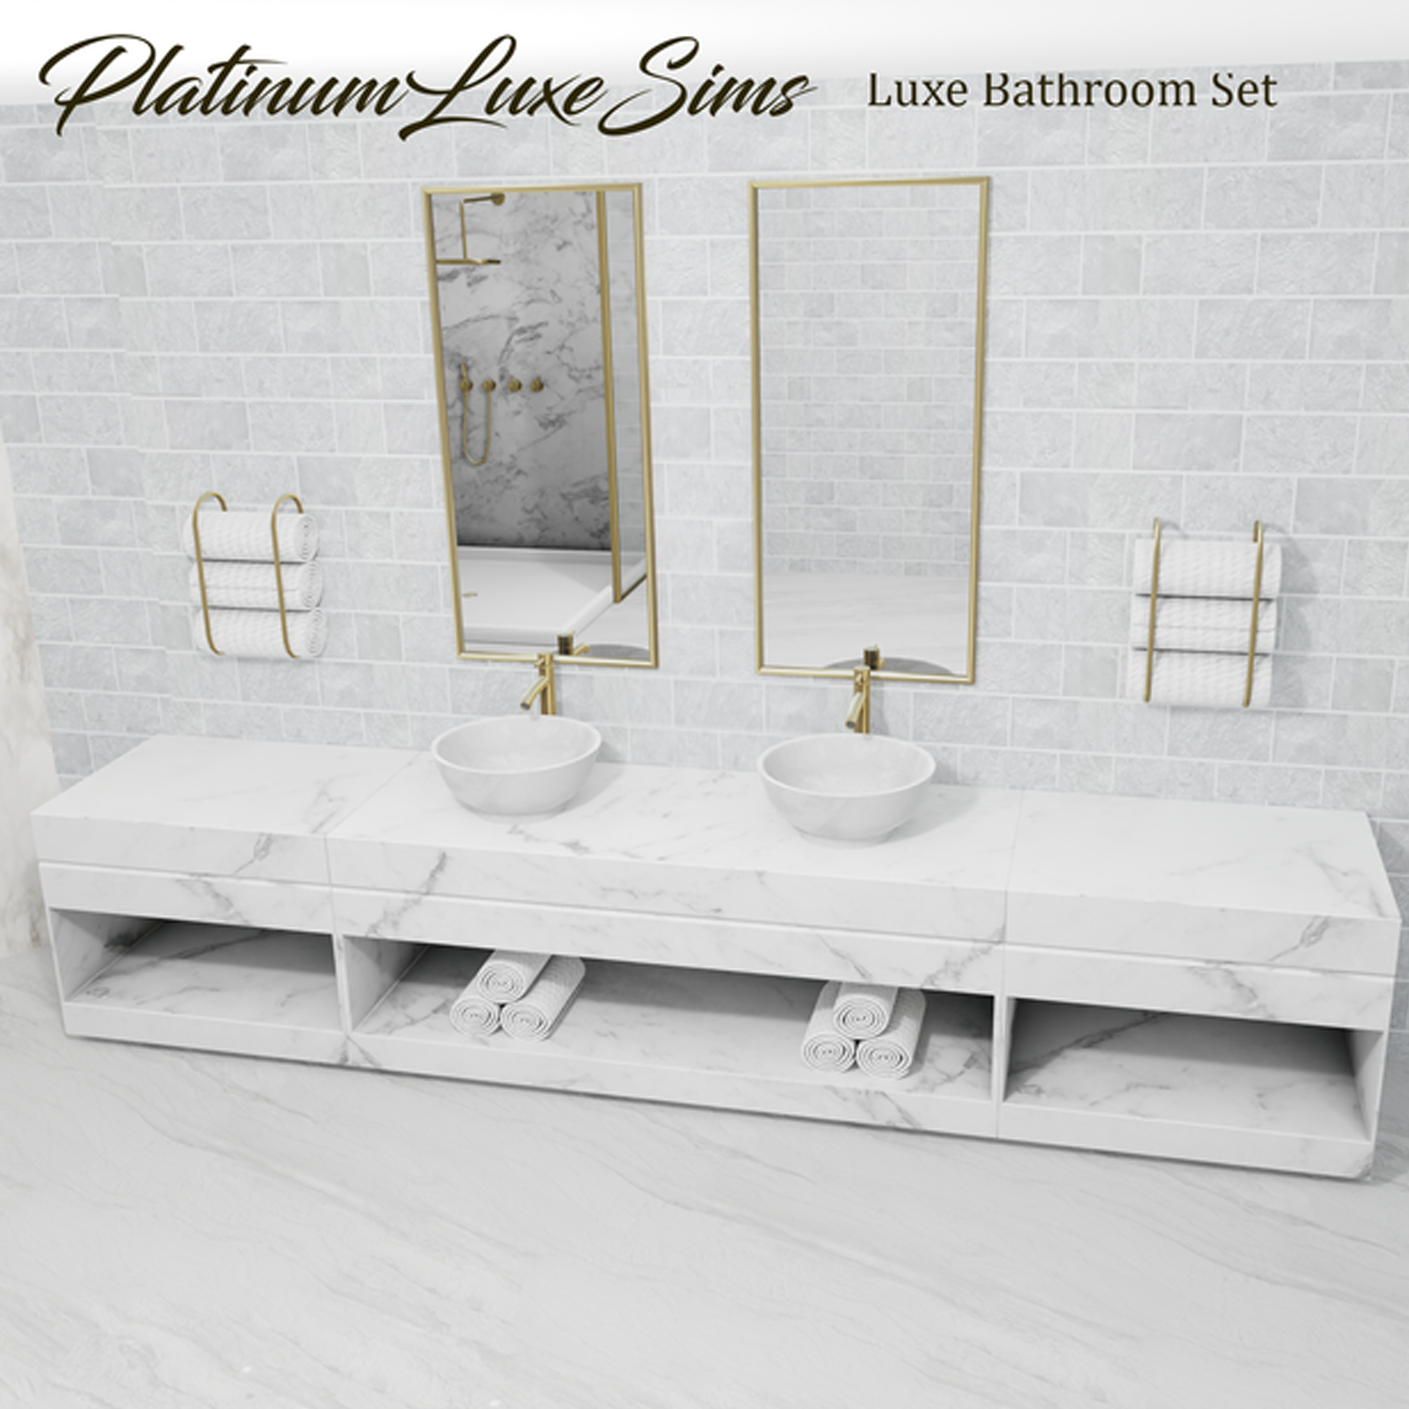 Luxe Bathroom Set project avatar